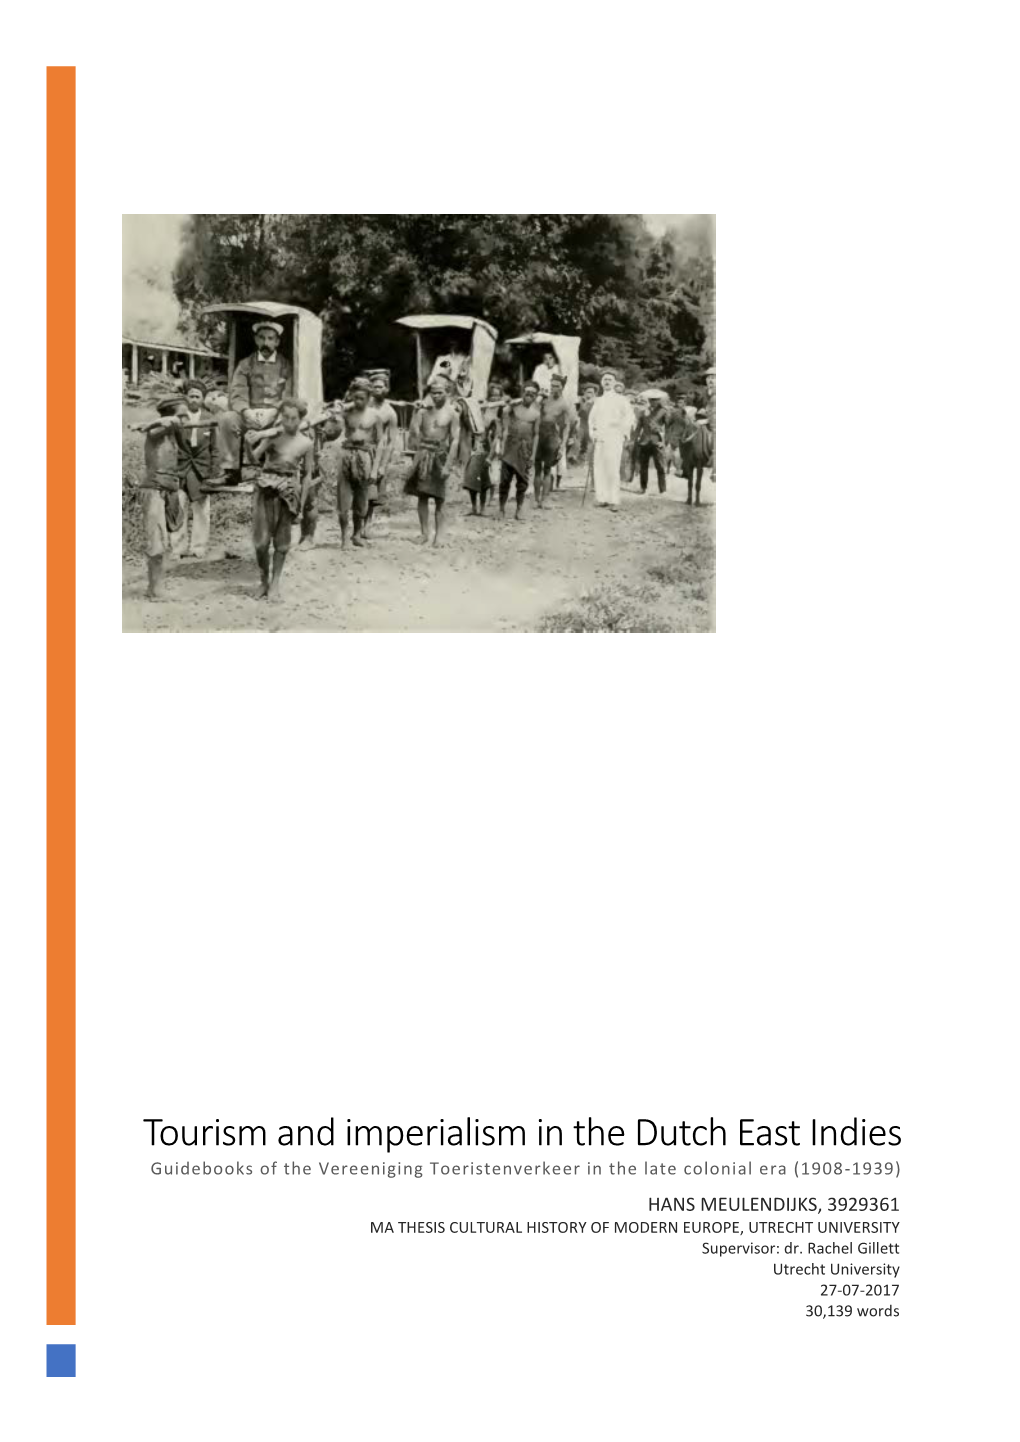 Tourism and Imperialism in the Dutch East Indies